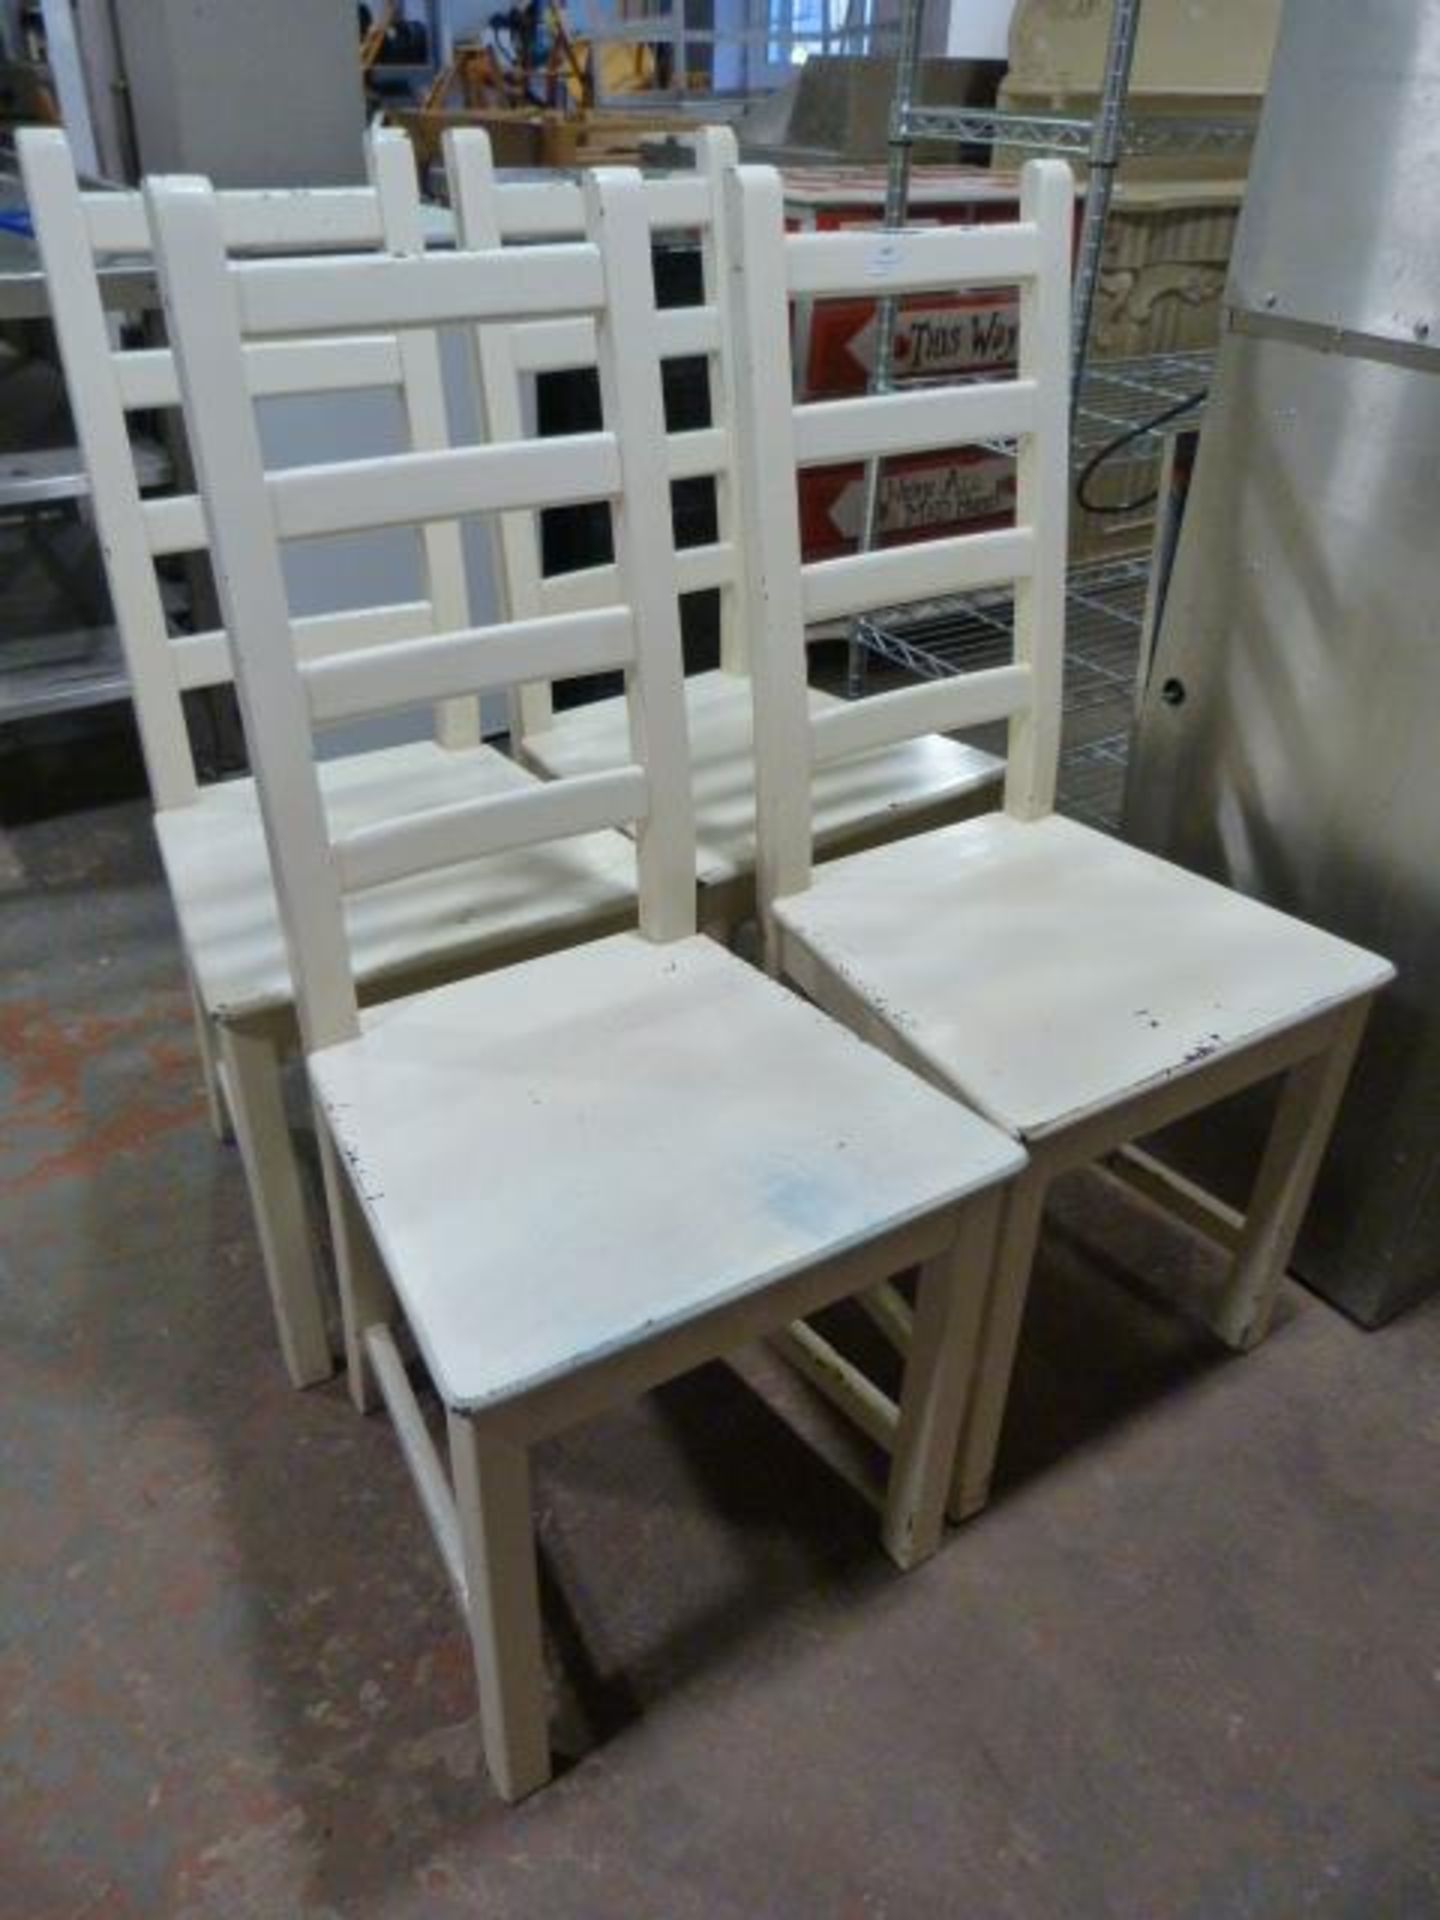 Four White Wooden Chairs